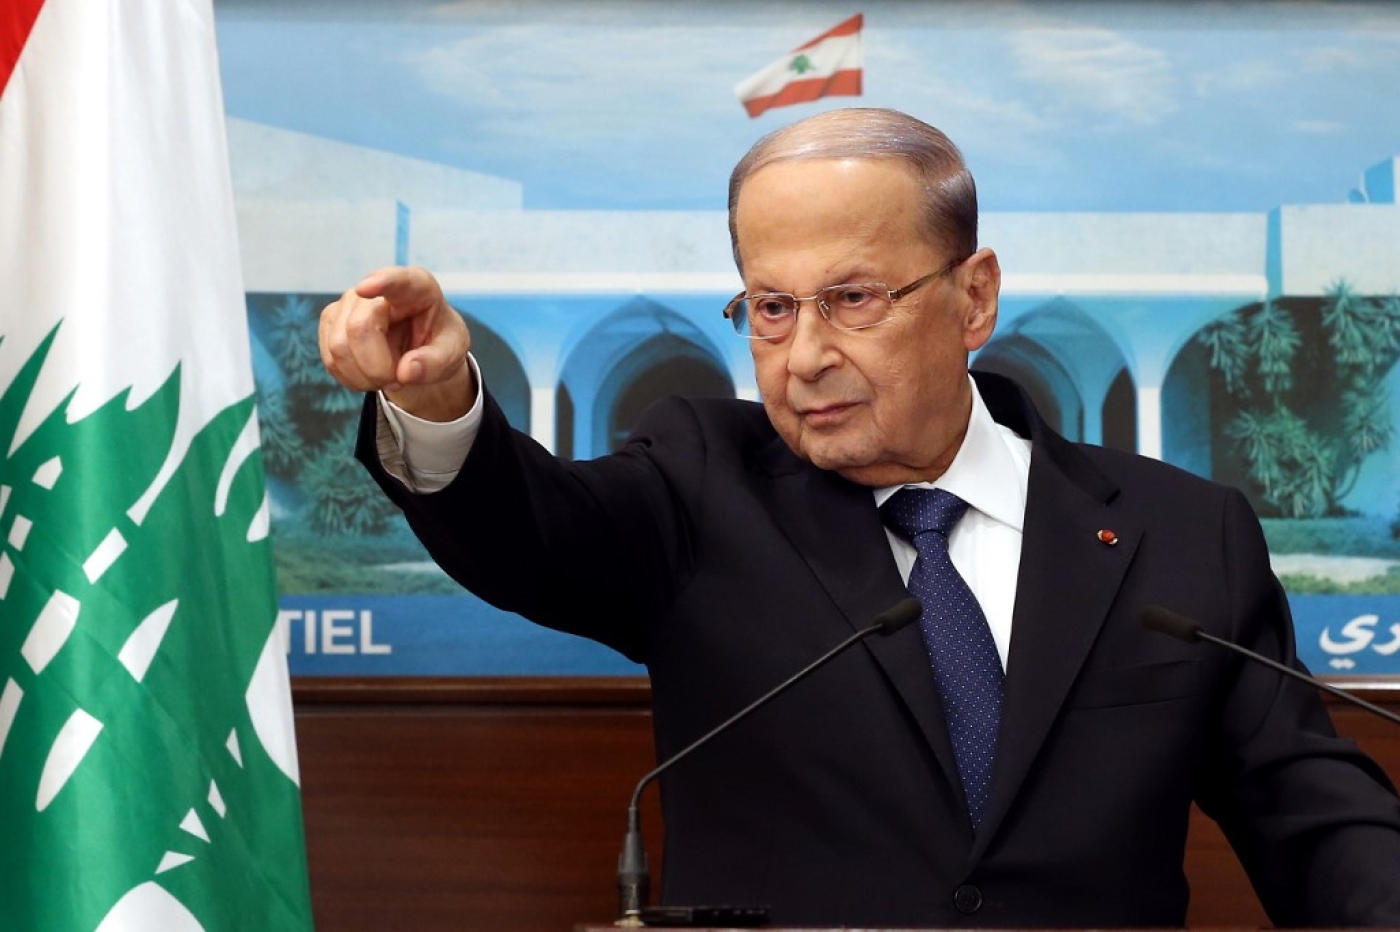 Lebanese President Michel Aoun gave a televised address a week after a deadline with France to name a cabinet passed.